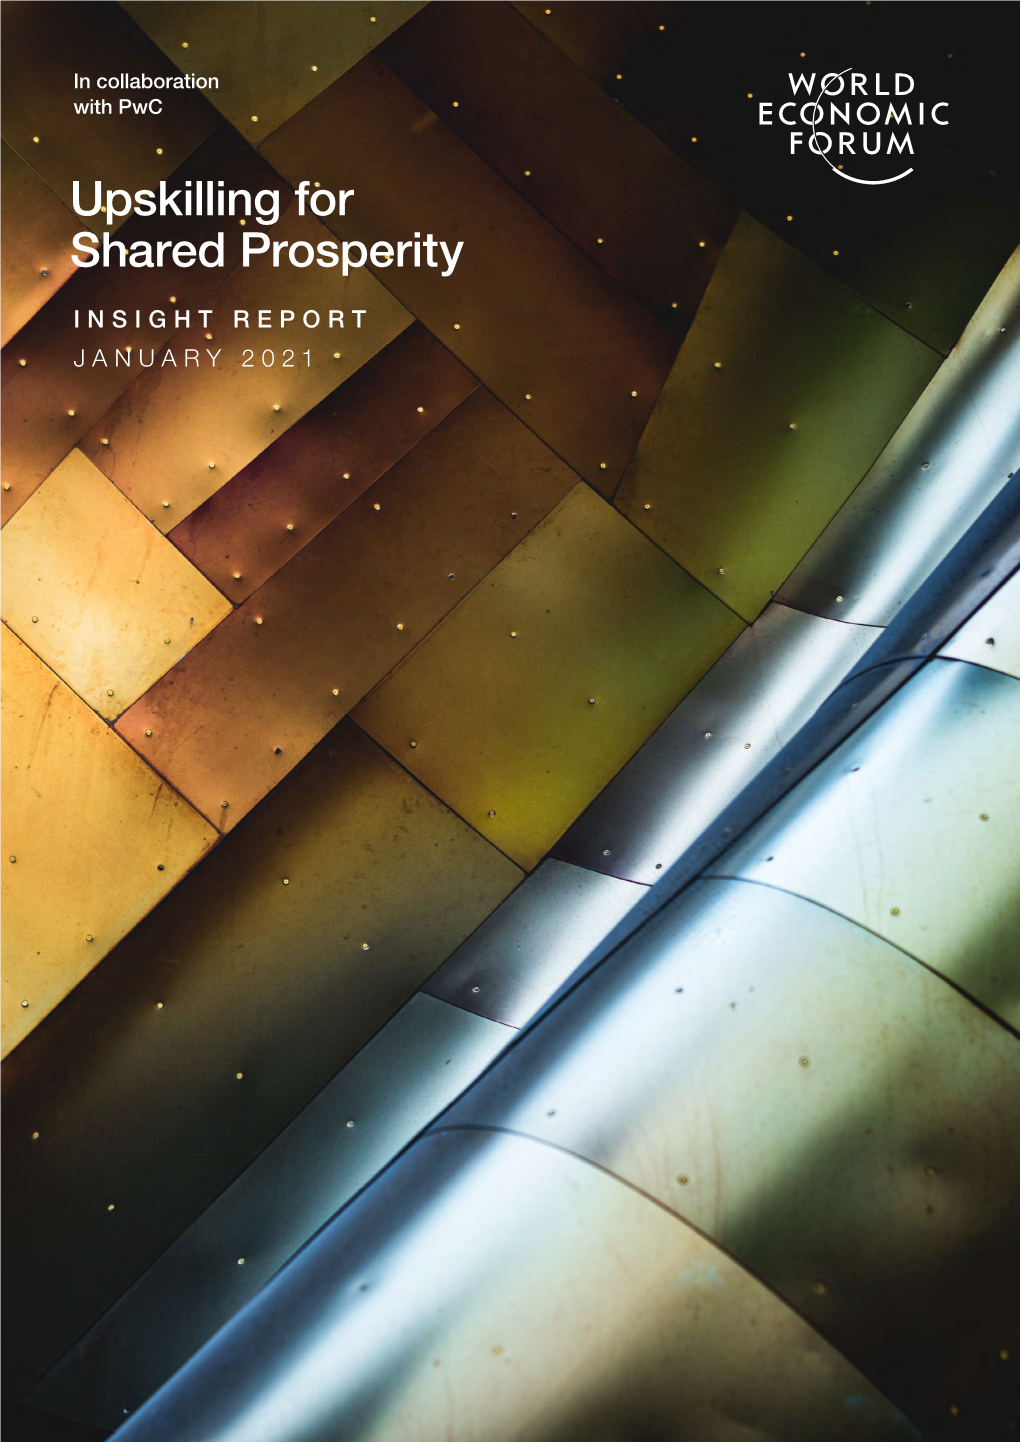 Download the Full Report Upskilling for Shared Prosperity